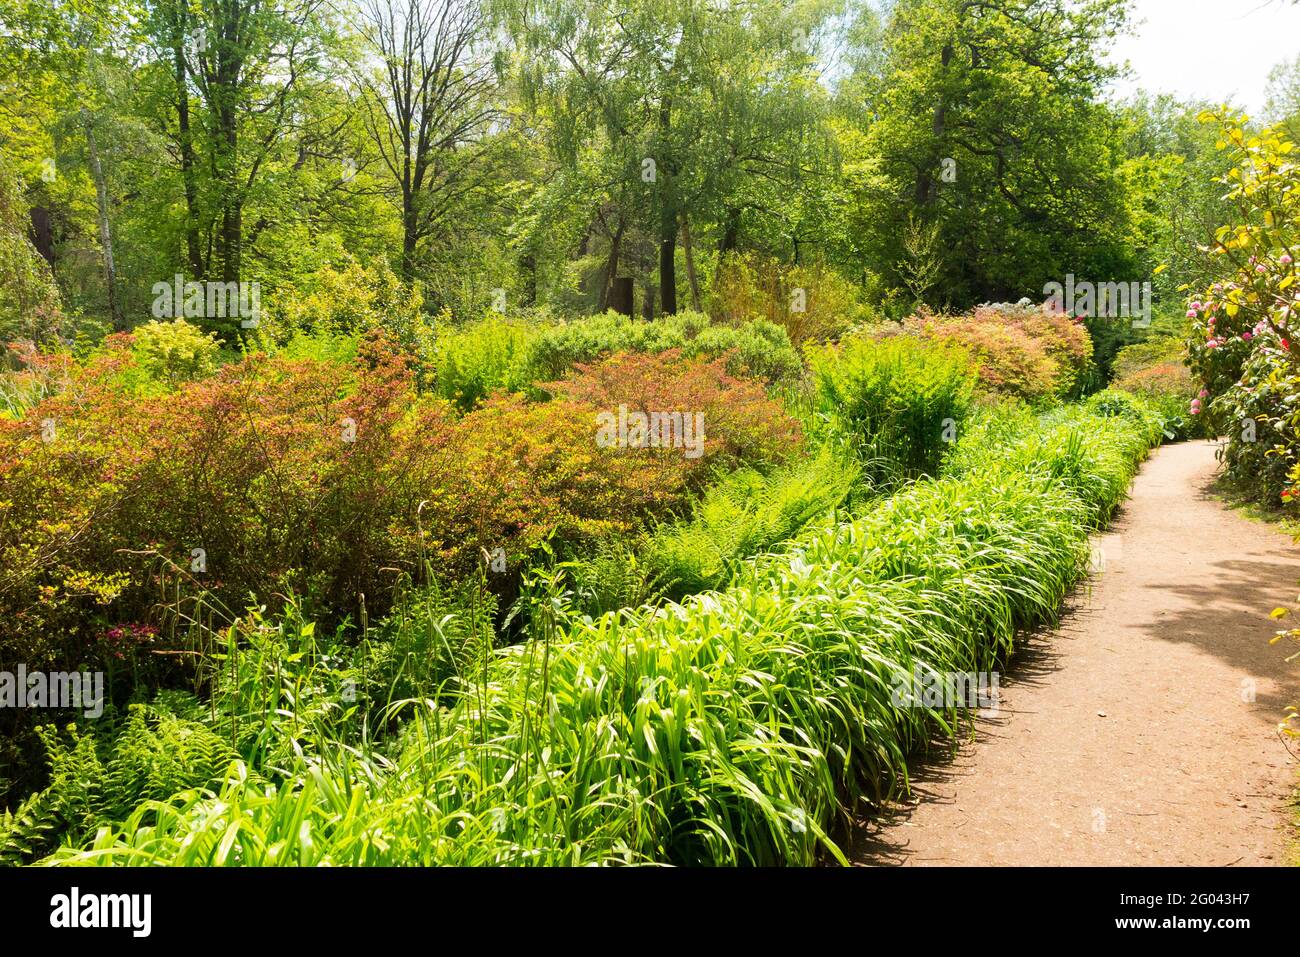 Inside the Isabella Plantation with plant border / borders to the beds and path. Richmond Park. UK. The Isabella Plantation contains many acid soil loving plants such as rhododendrons azaleas and camellias.  (123) Stock Photo